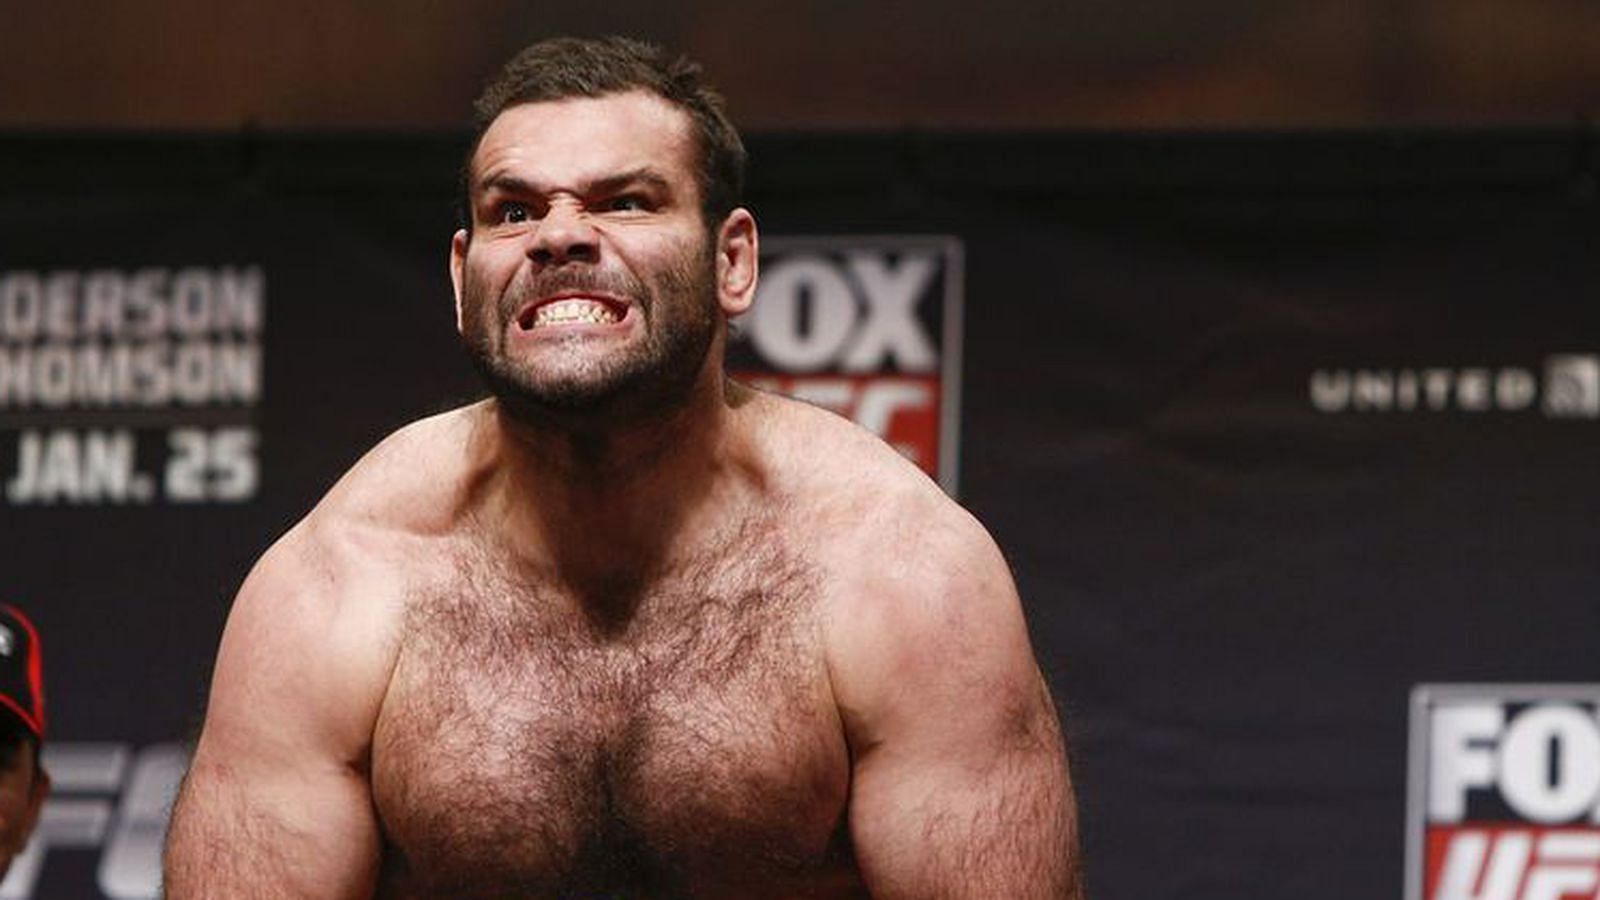 Gabriel Gonzaga garnered an insane amount of hype after knocking out Mirko Cro Cop with a head kick